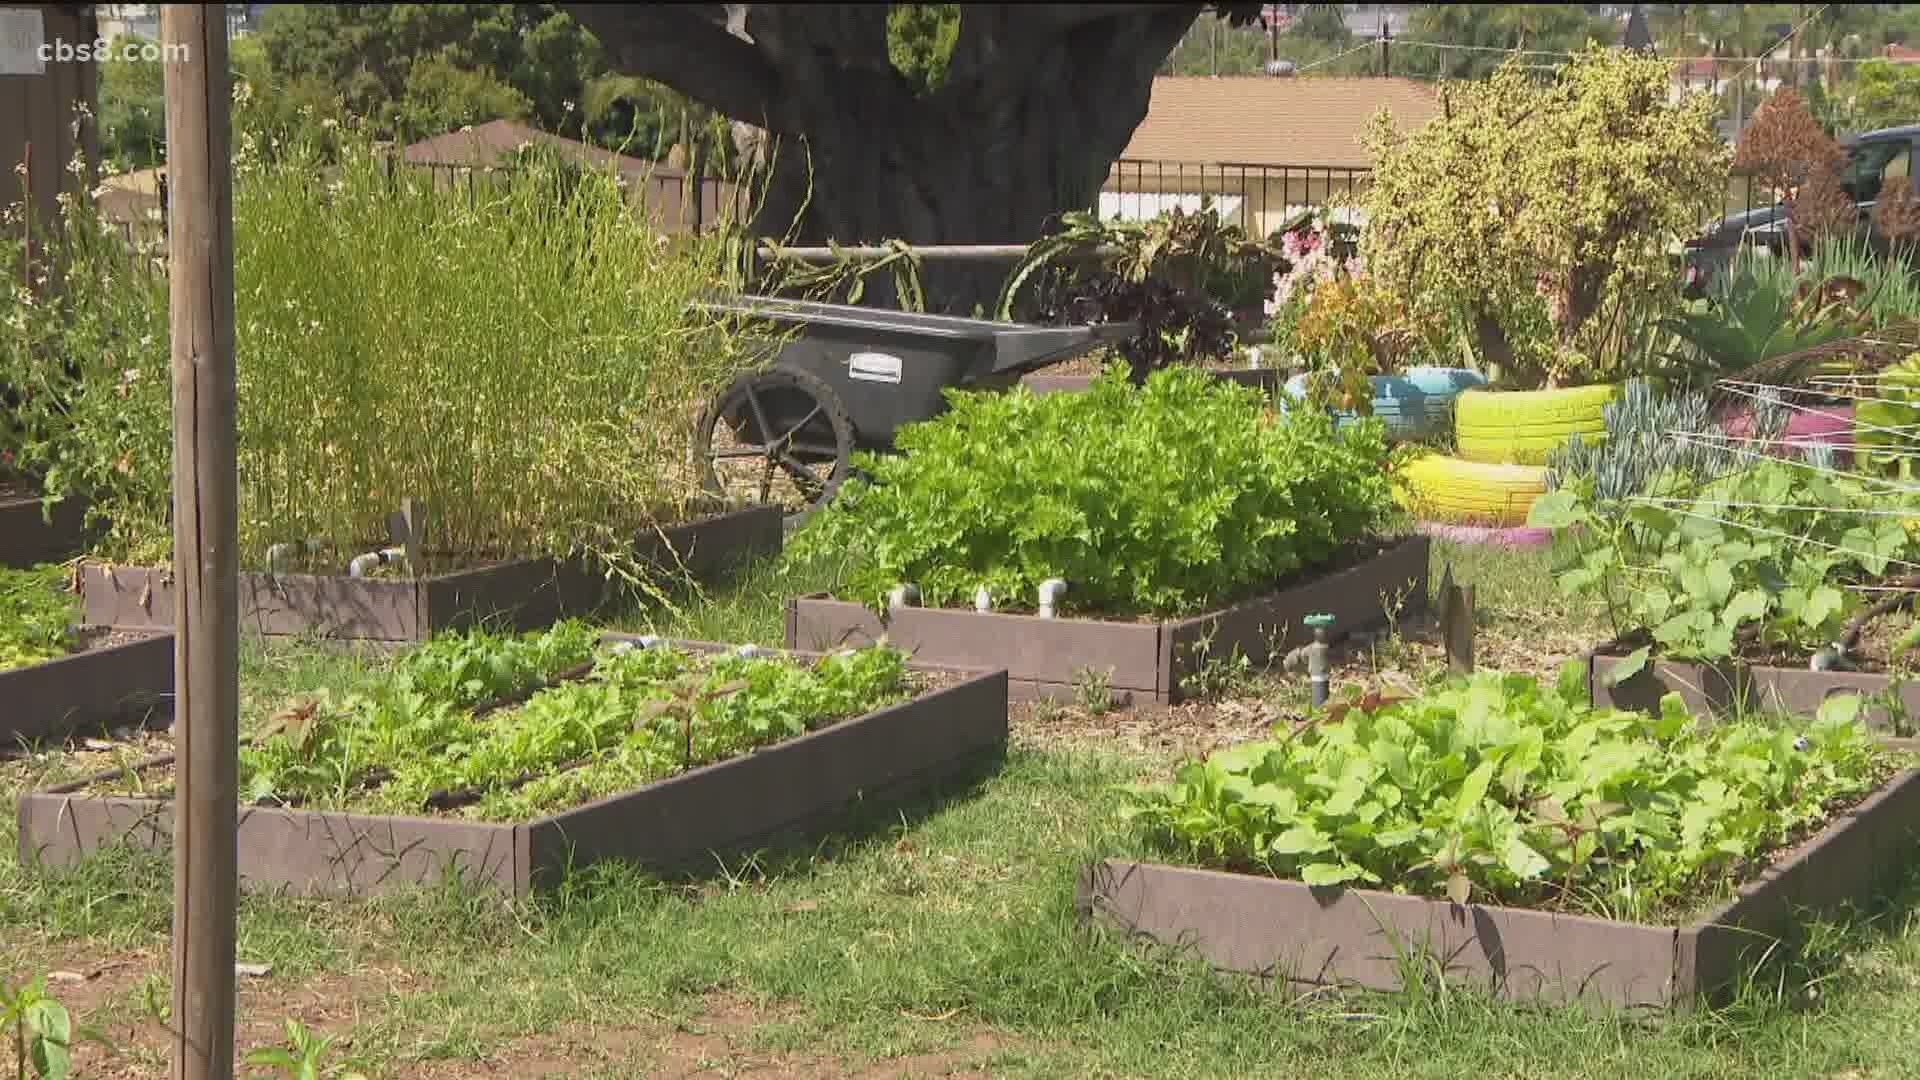 Packing up fresh fruits and veggies to give out to the community in need, a South Bay garden has increased its food production to meet the needs of families.